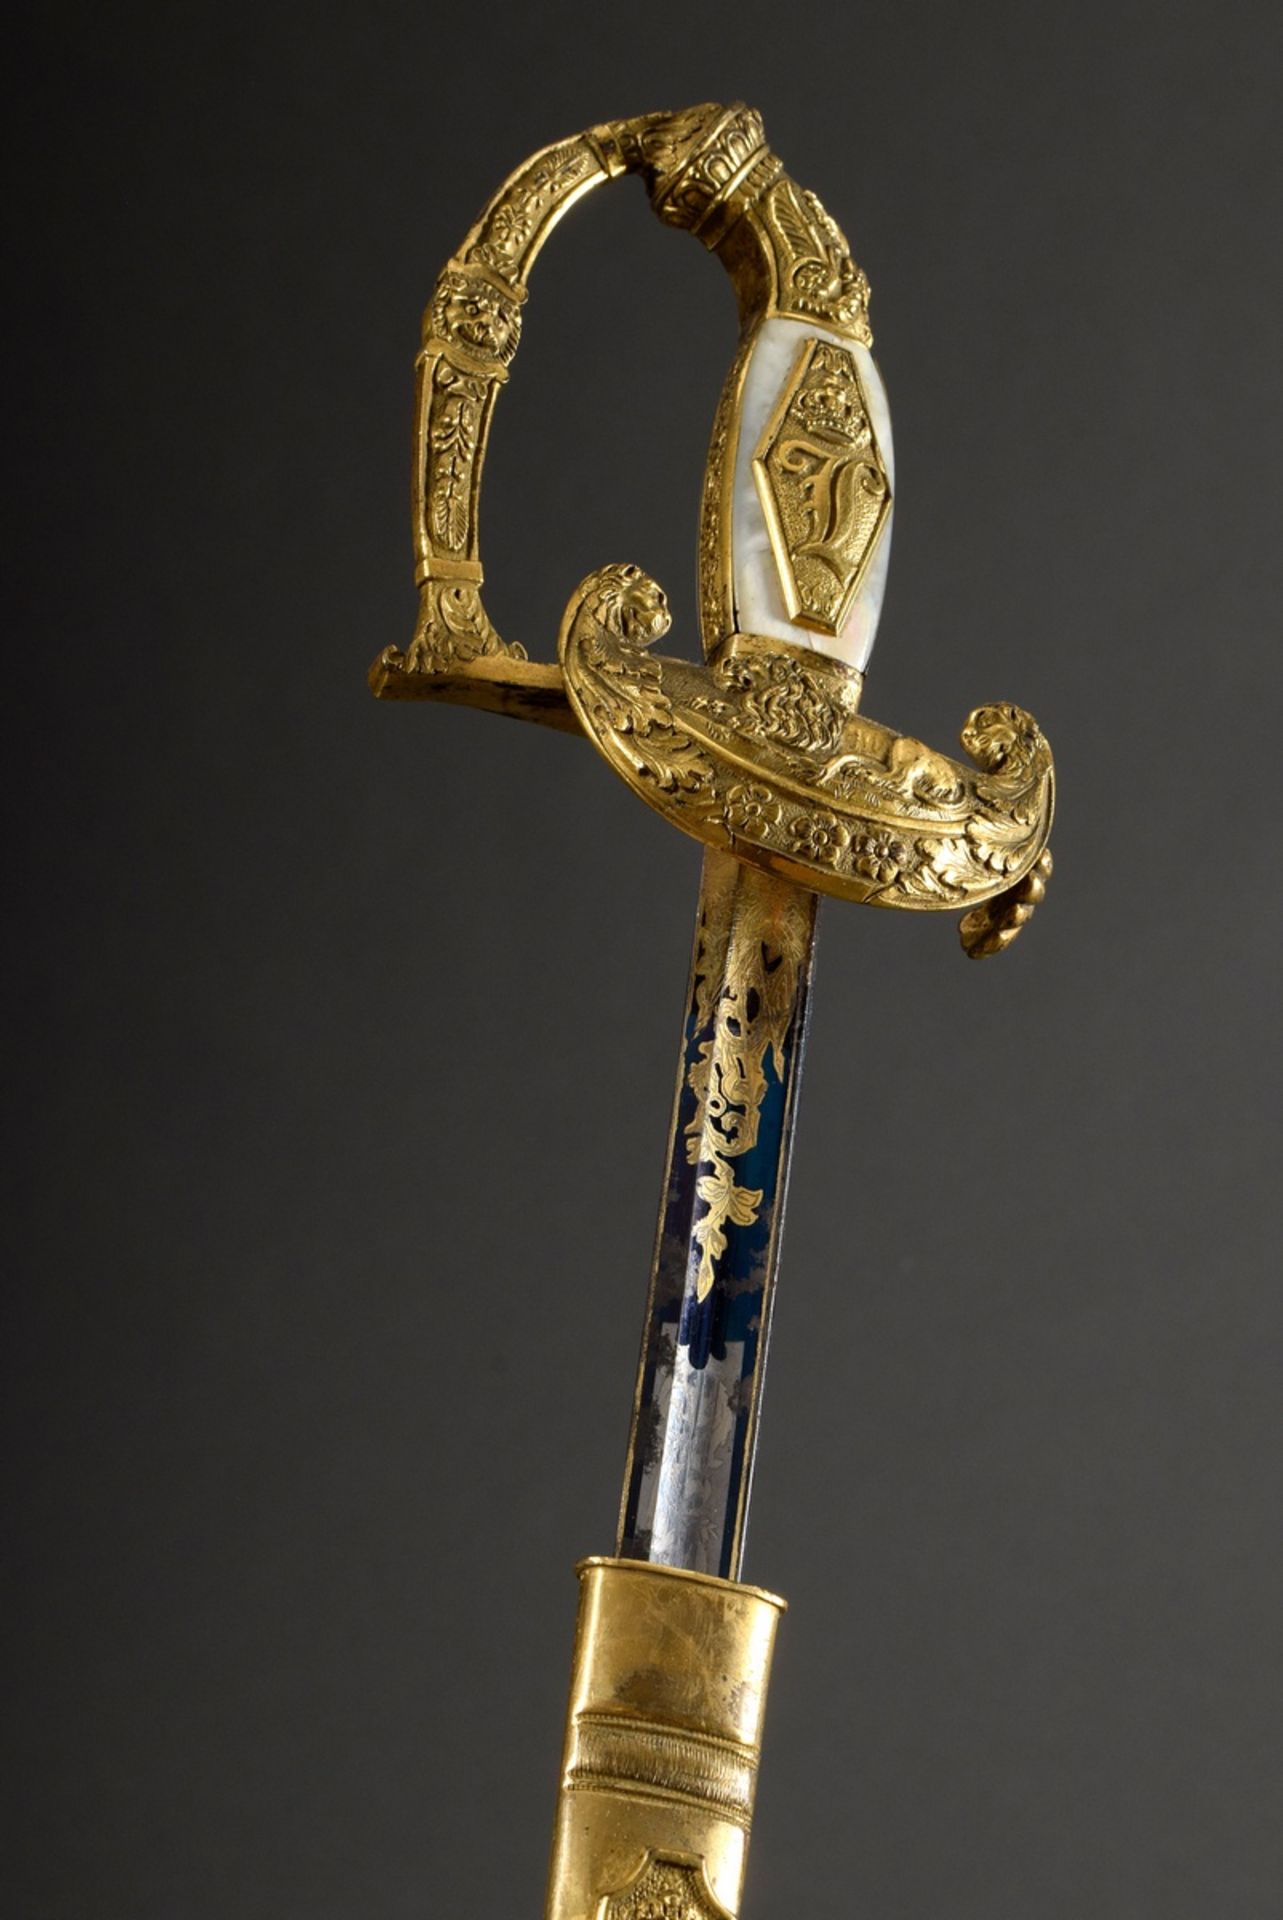 Bavarian civil servant's sword from the reign of King Ludwig I (1825-1848) or King Ludwig II (1864- - Image 7 of 11